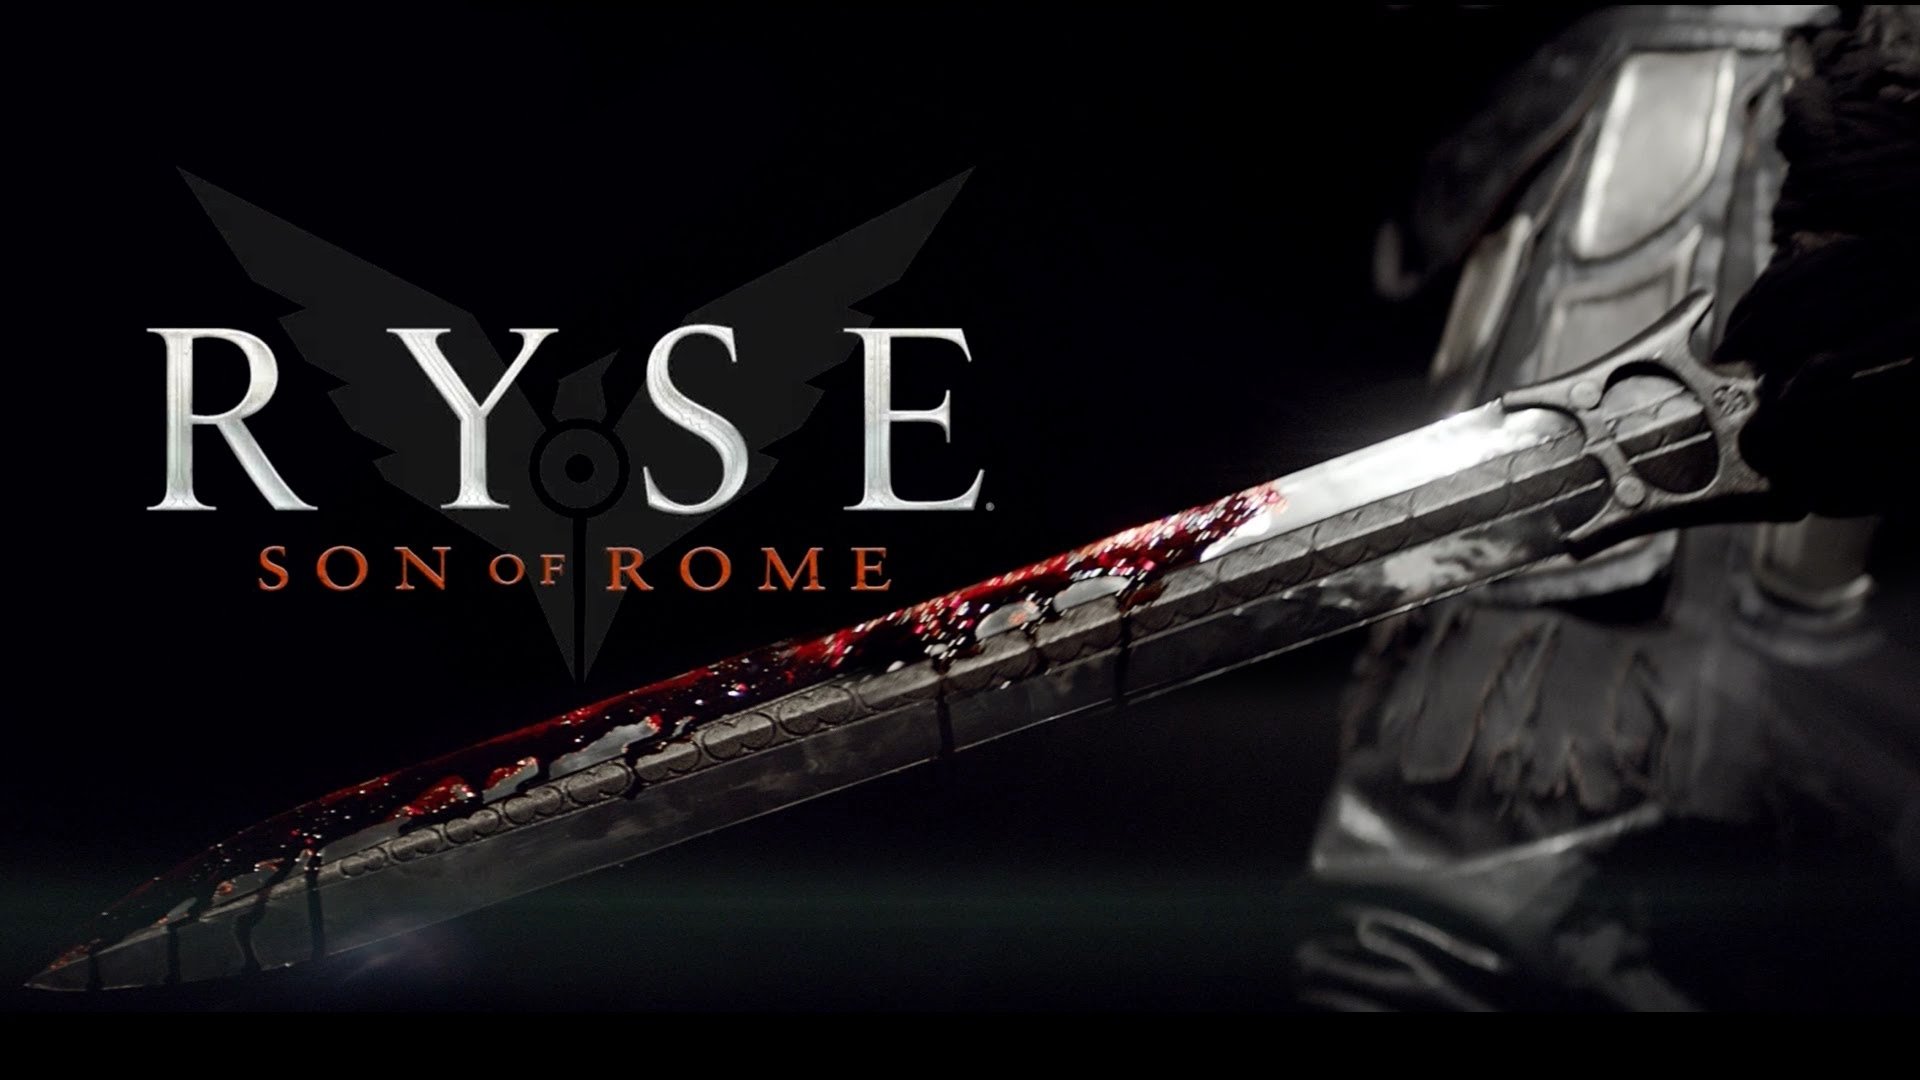 ryse son of rome wallpaper,music,font,photography,darkness,brand